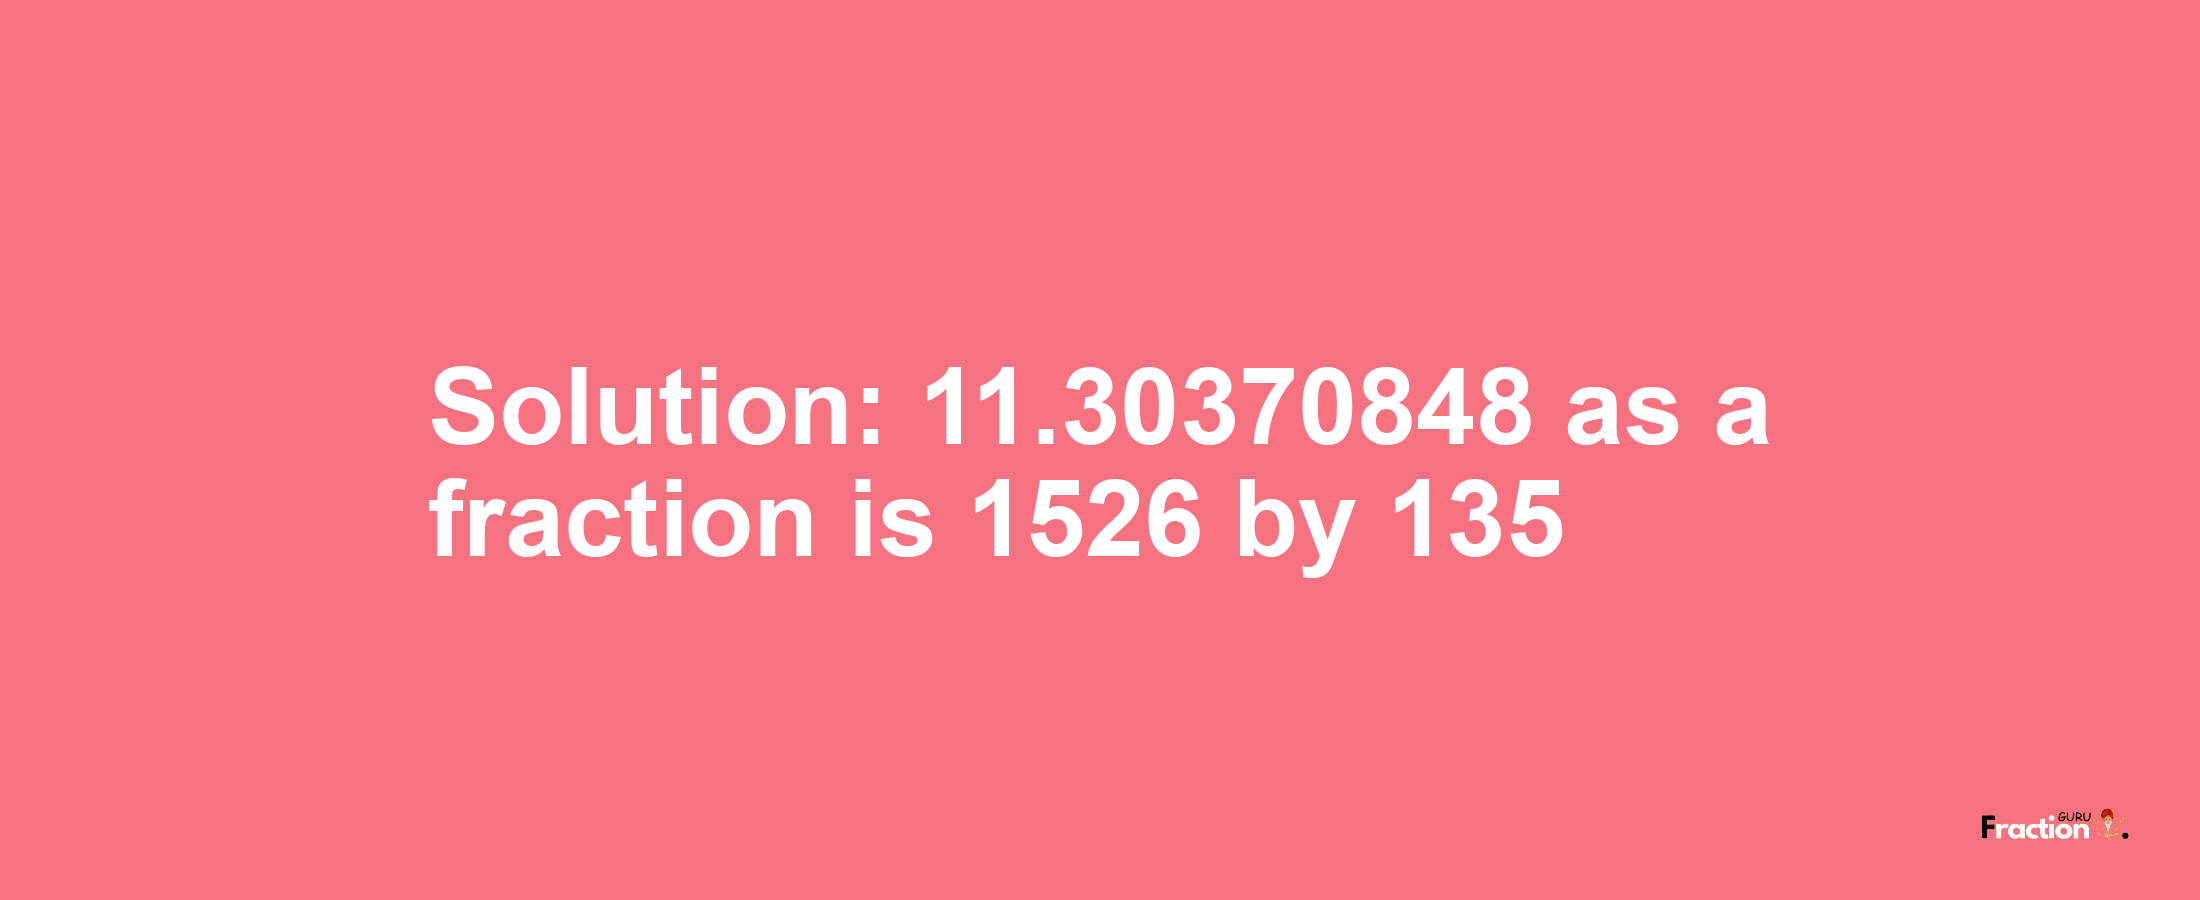 Solution:11.30370848 as a fraction is 1526/135